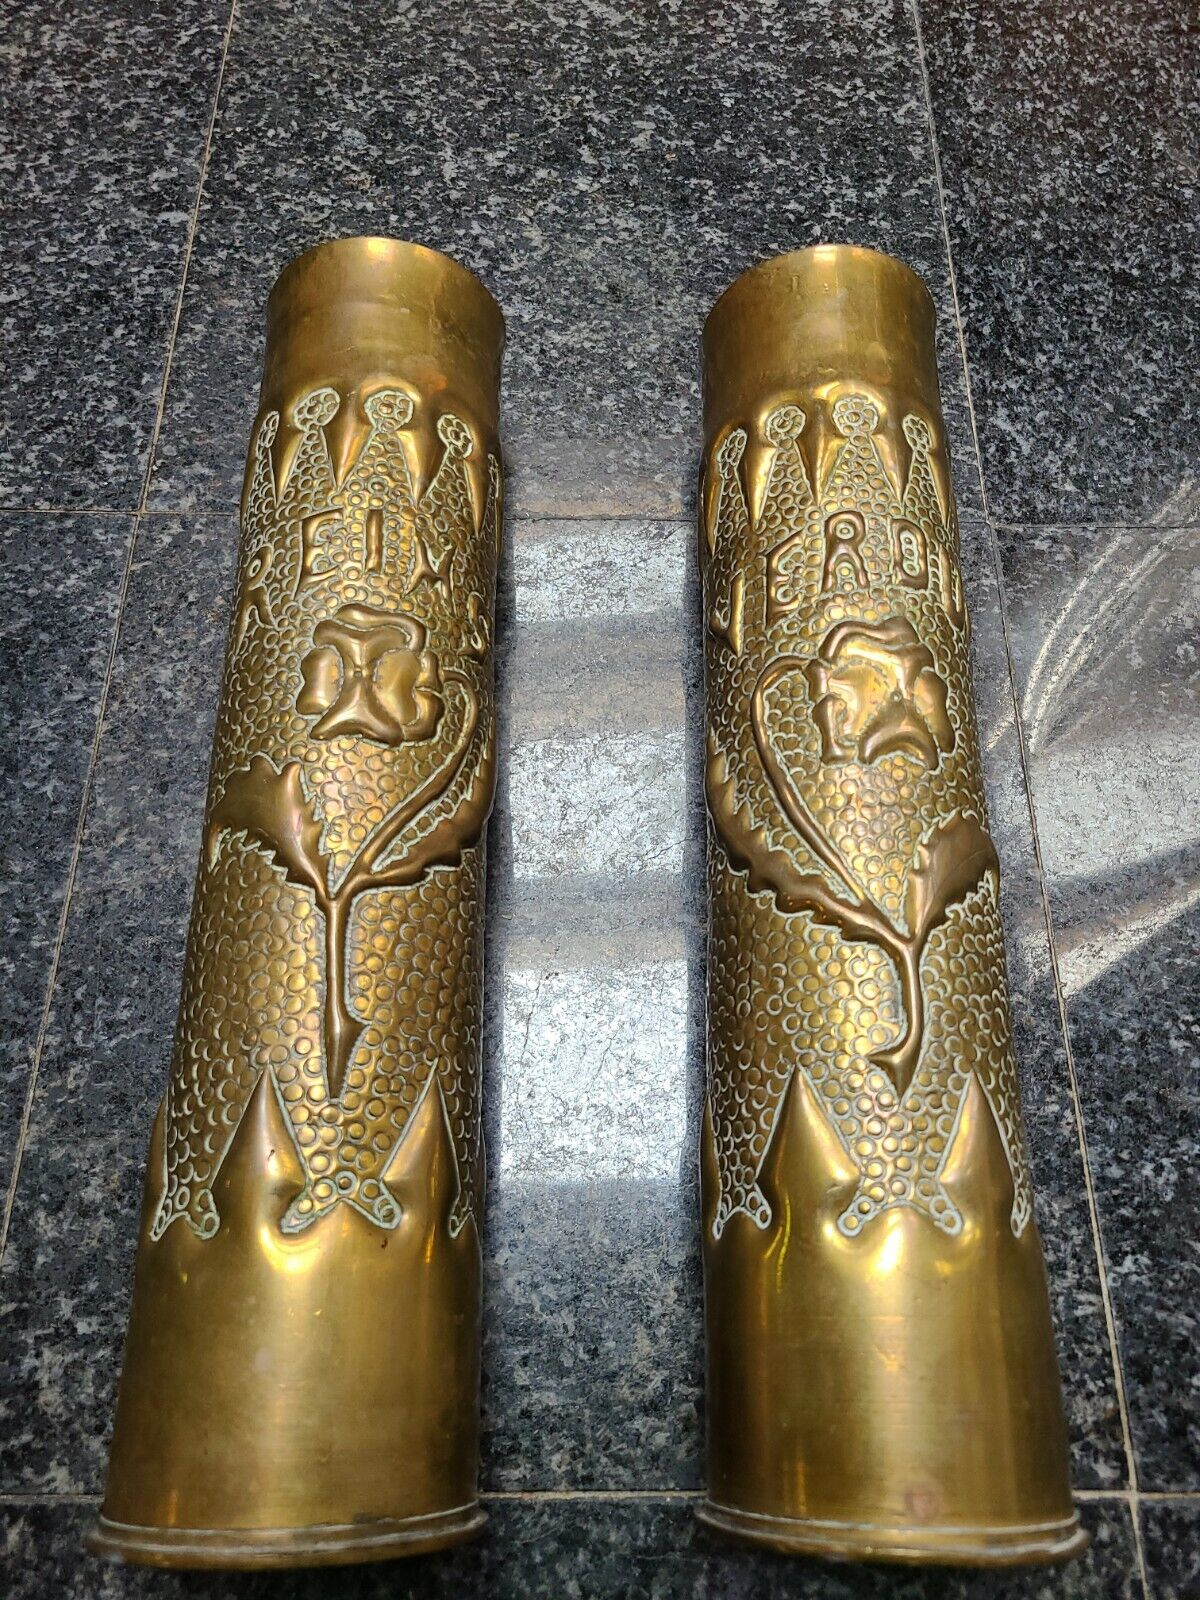 WWI French Trench Art Vase Pair (2) 1914-17 antique brass rose